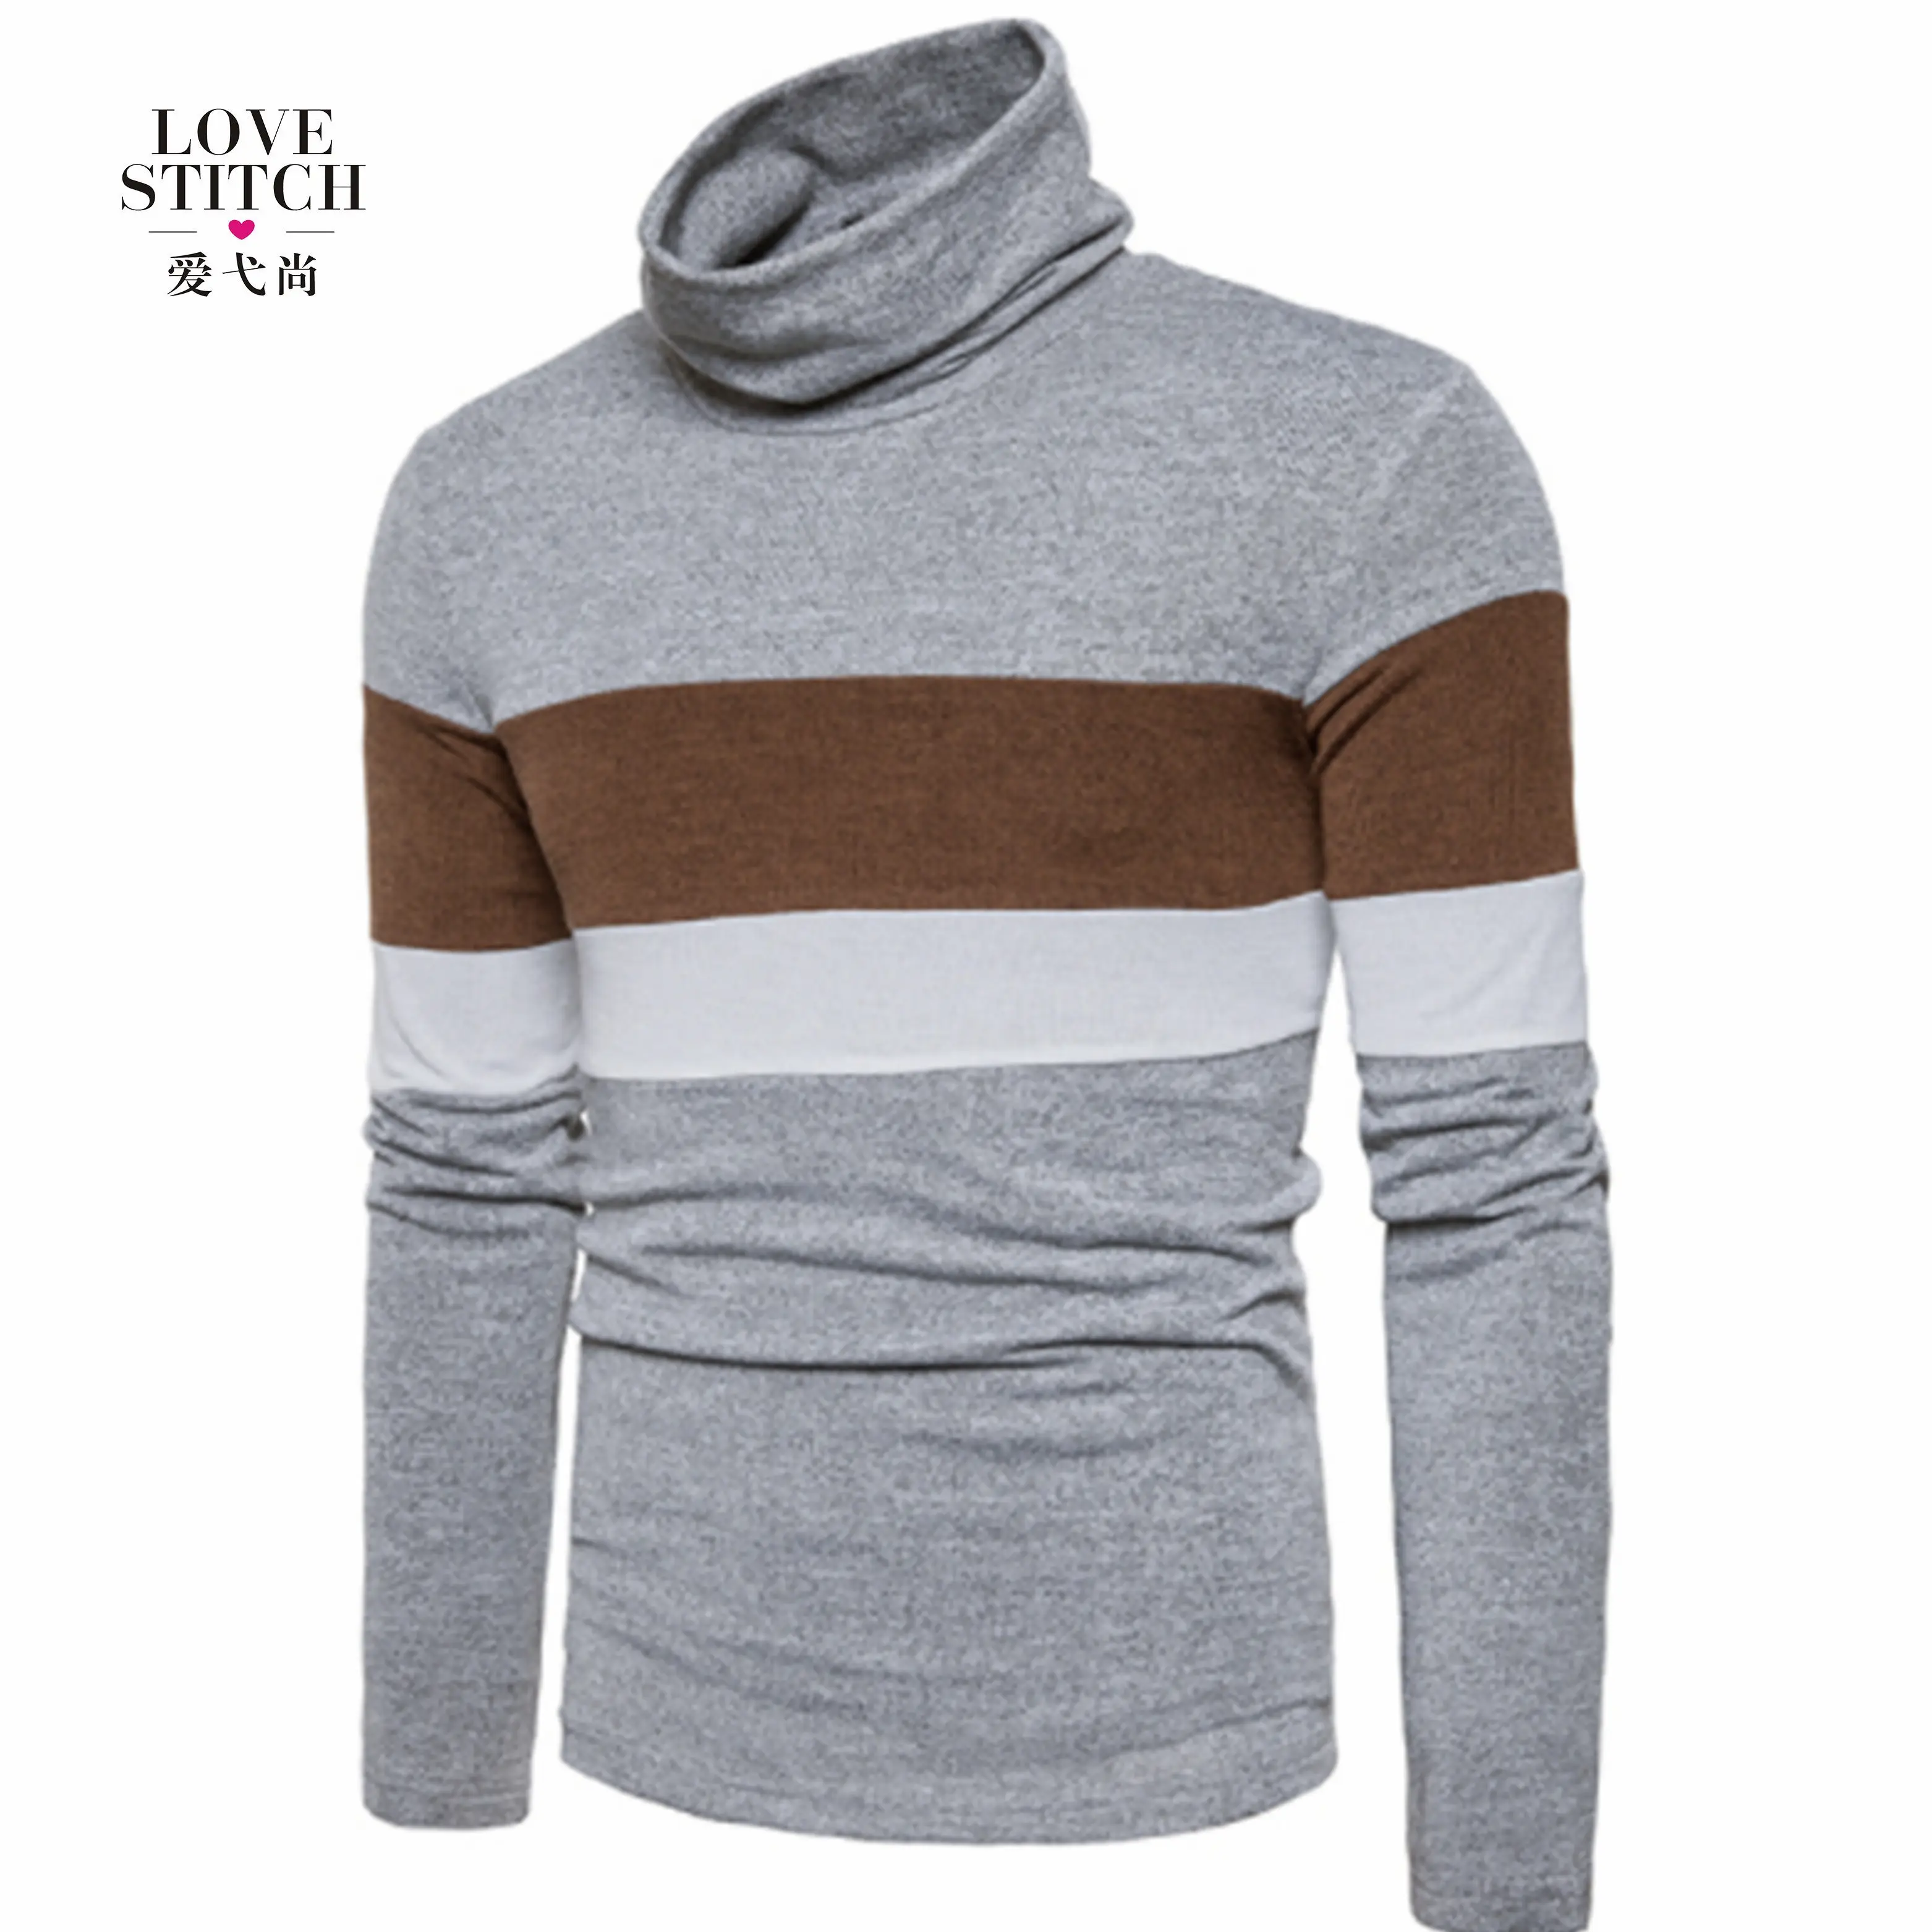 OEM &ODM best quality three color high collar basic style men's pullover sweater